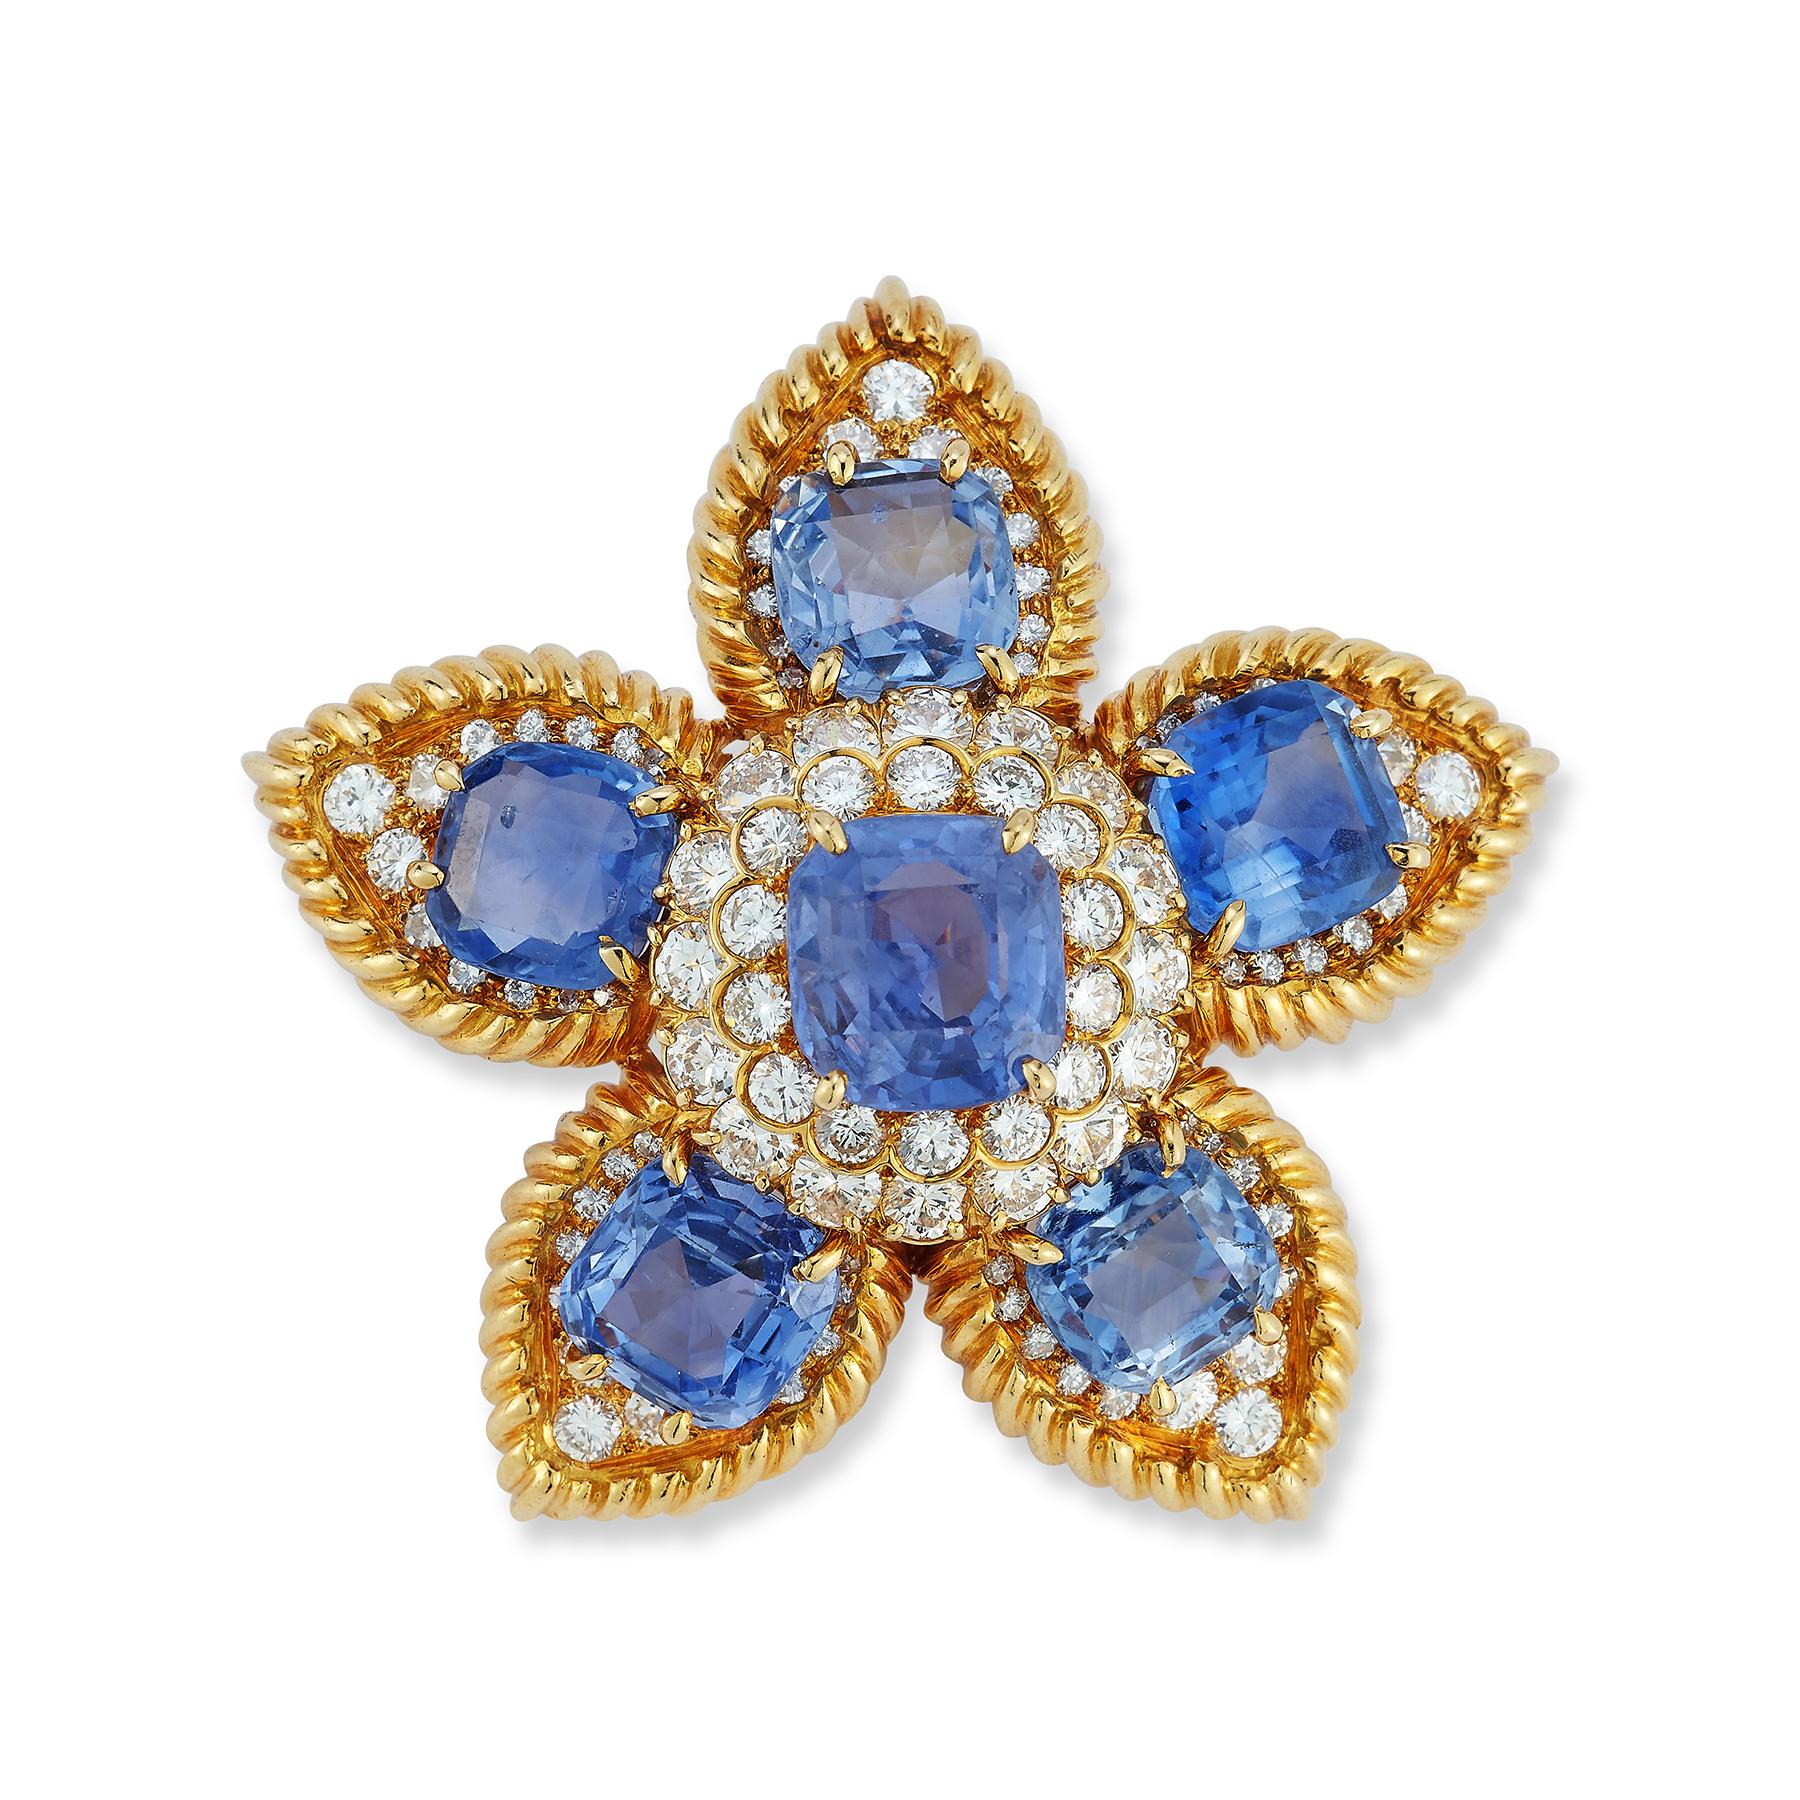 Van Cleef & Arpels Sapphire & Diamond Flower Brooch

1 larger cushion cut center natural Ceylon sapphire surrounded by 5 smaller cushion cut natural Ceylon sapphires weighing approximately 35-40 carats & set with round cut diamonds.

Accompanied by